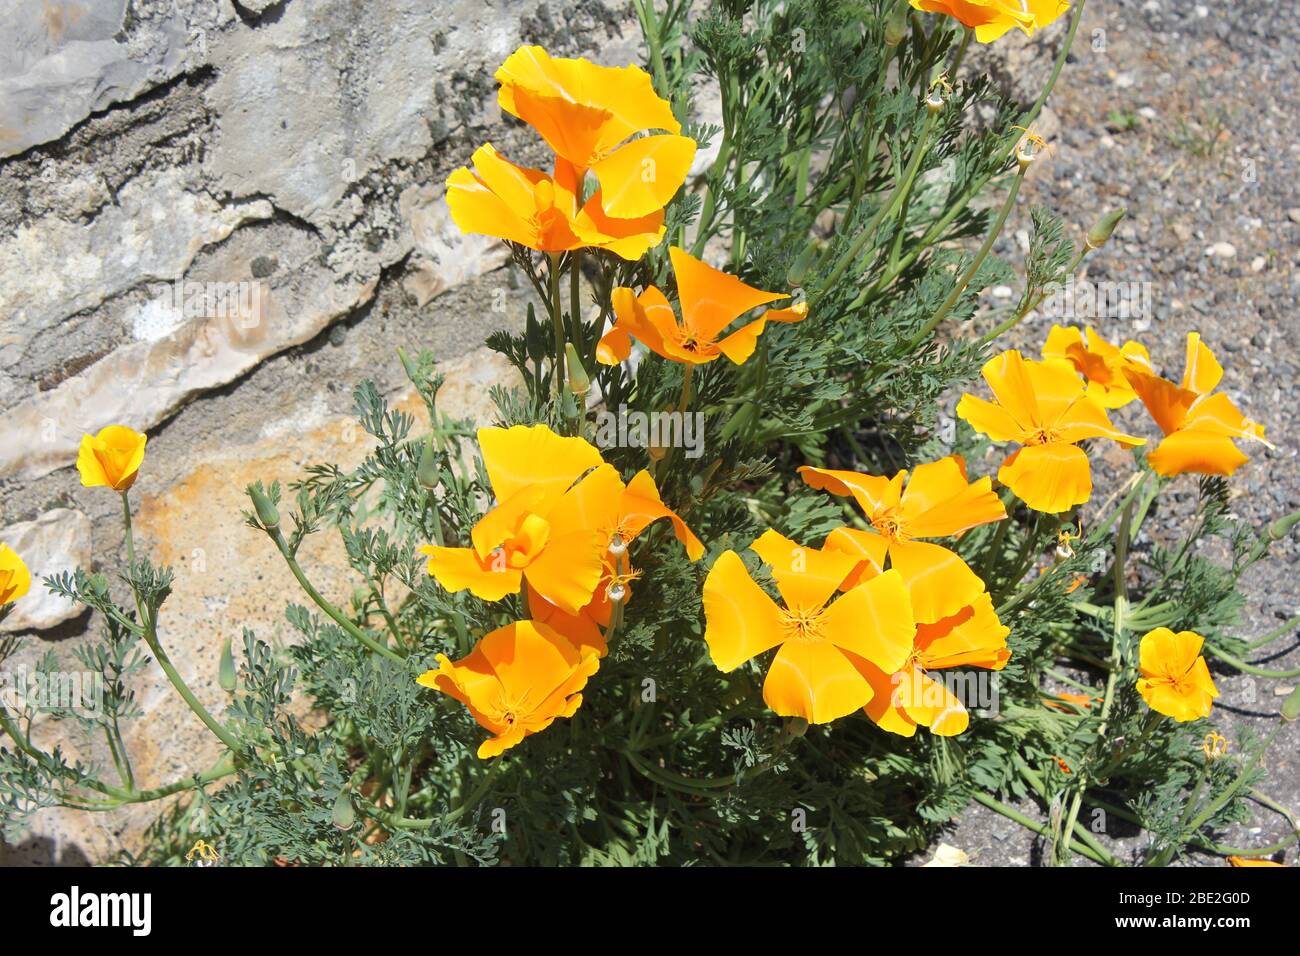 Group of Californian poppies Stock Photo